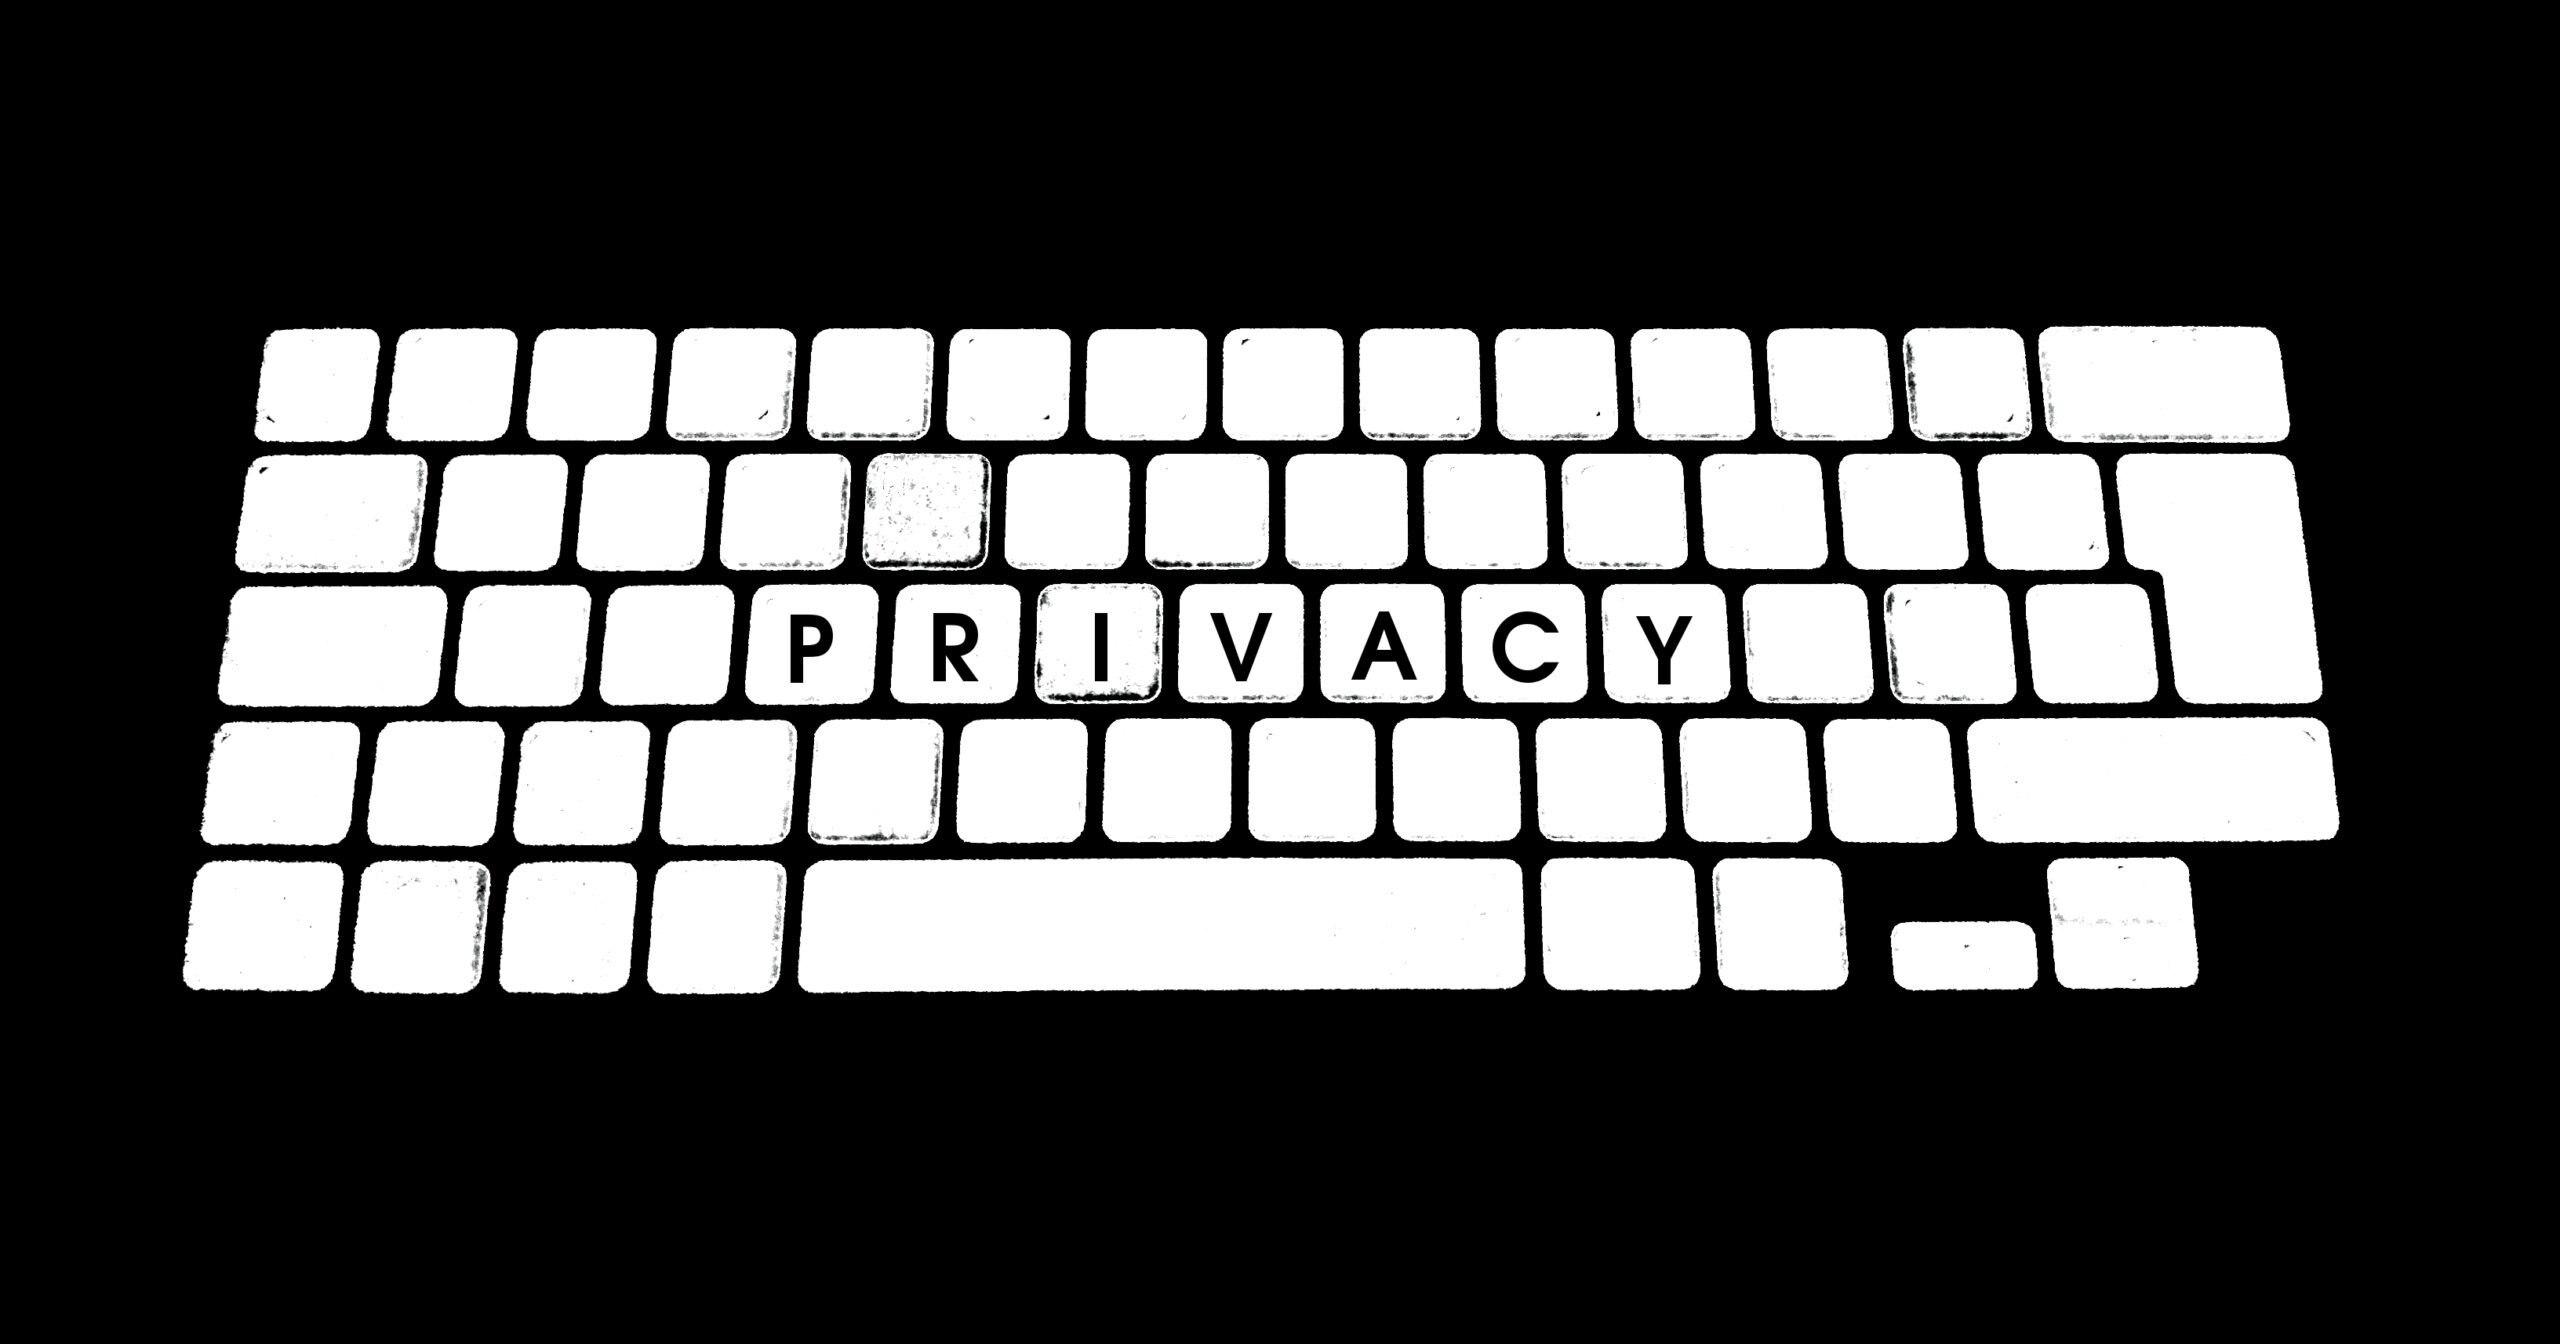 Digital Privacy While Writing